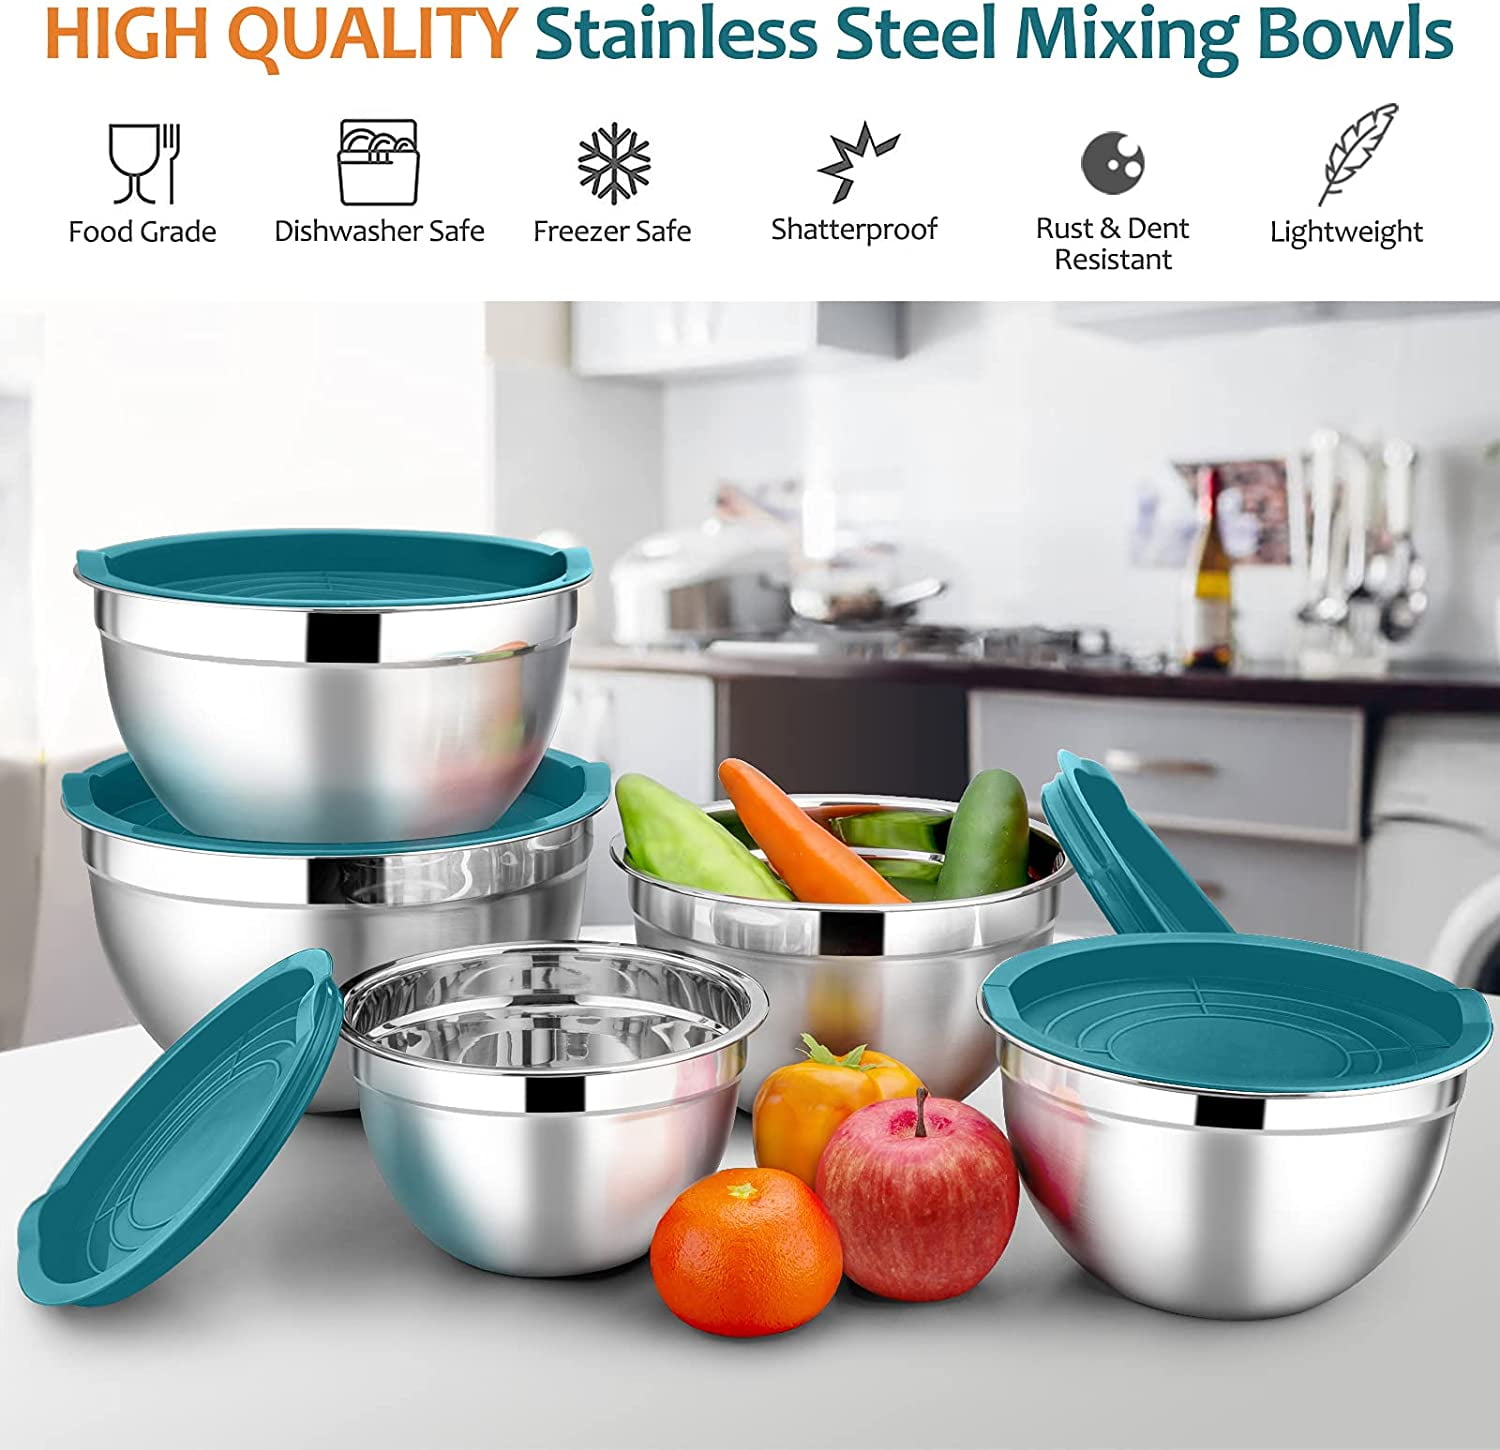 weltonhm Mixing Bowls Set of 3 Stainless Steel Bowl with Lids Set, Nesting  Bowls with Graters Airtight Lids for Cooking, Baking, Prepping(Green)